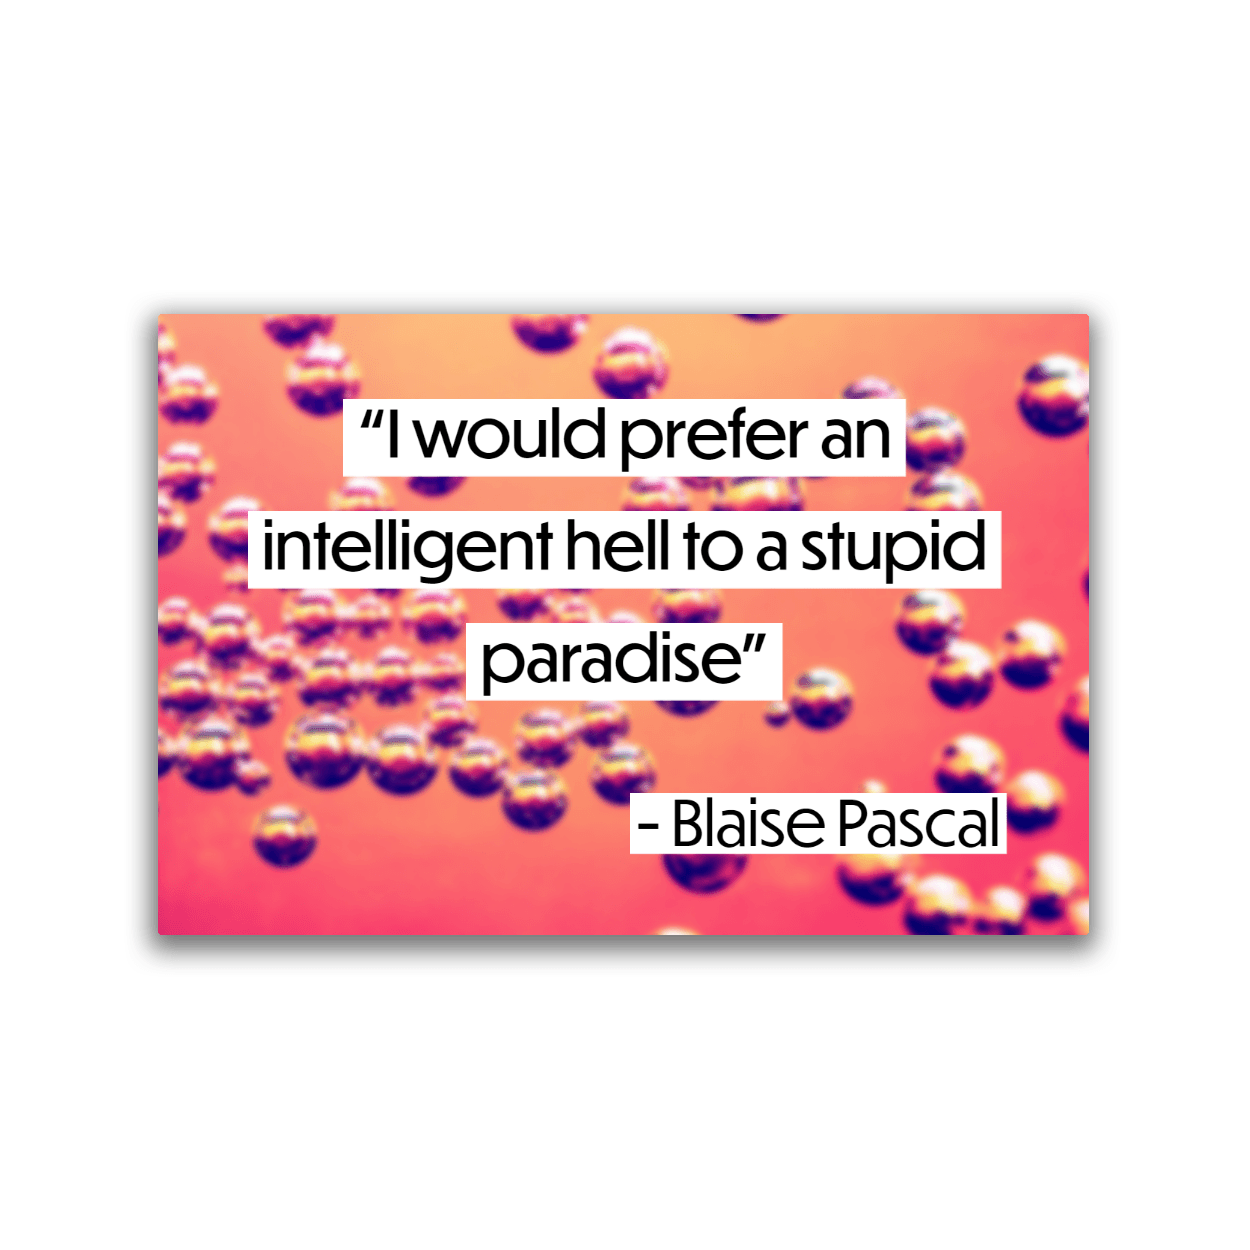 Image of a 2x3 magnet with a Blaise Pascal quote